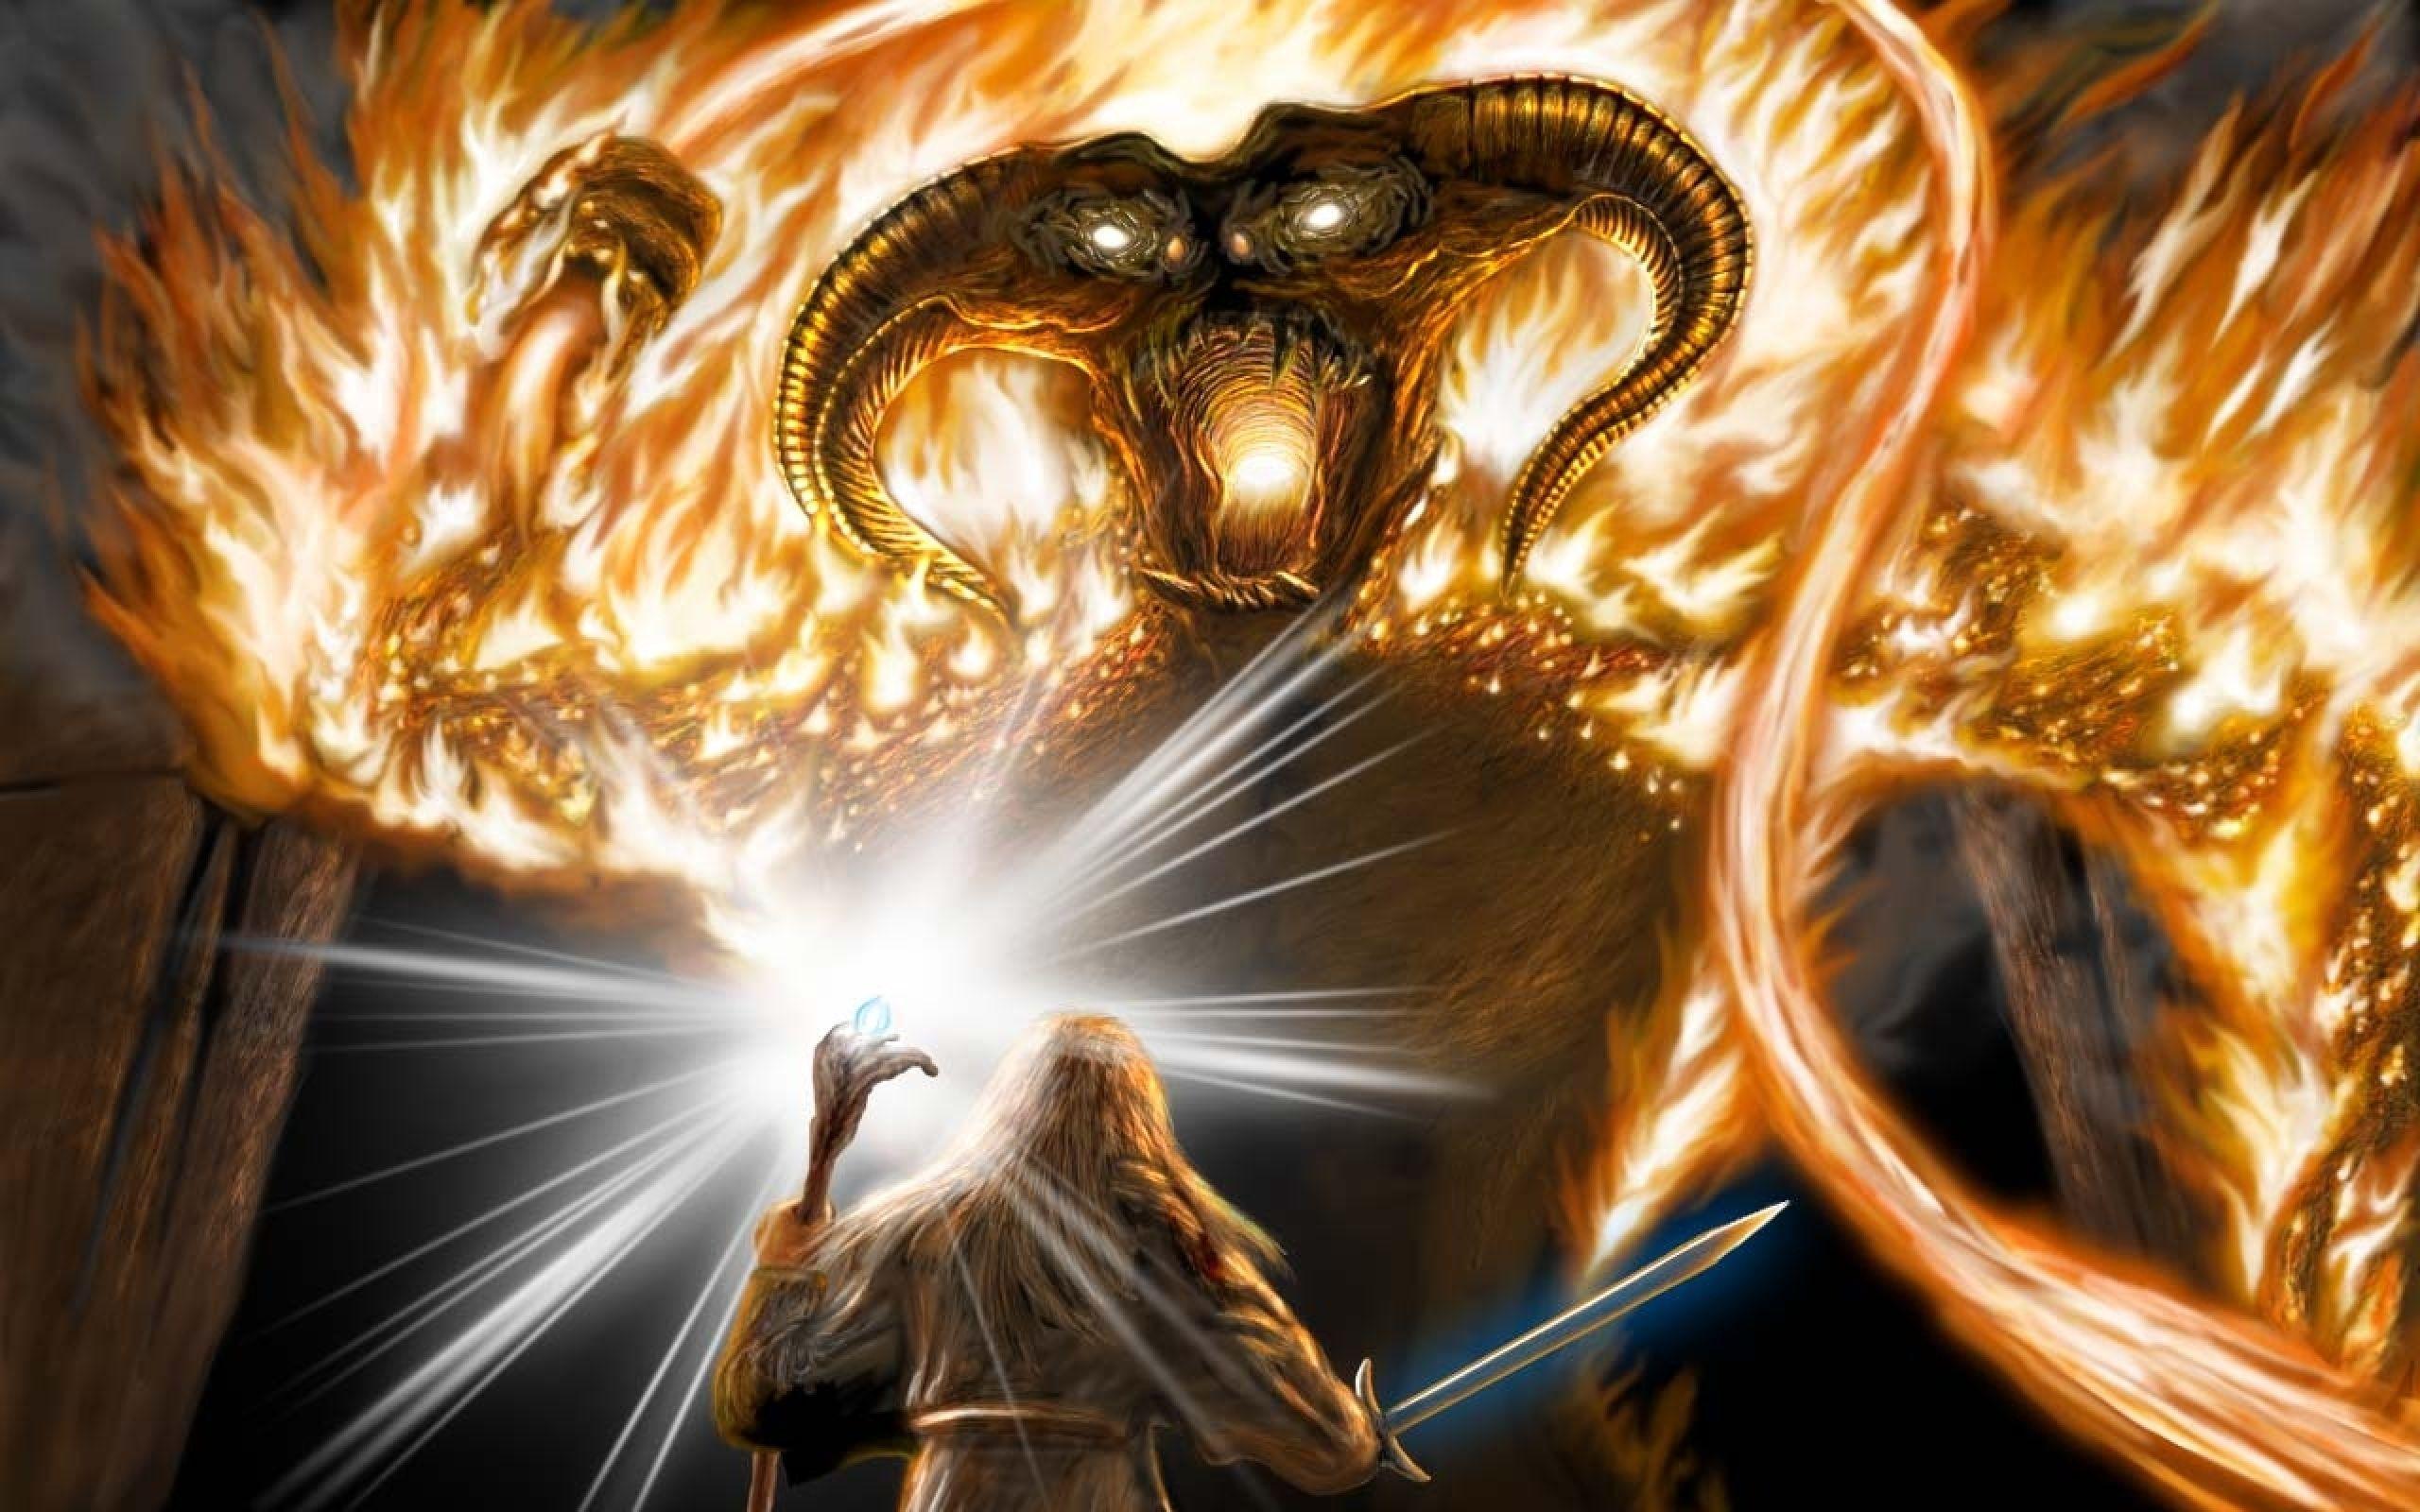 Wallpaper of The Lord of the Rings, Moria, Gandalf, Balrog